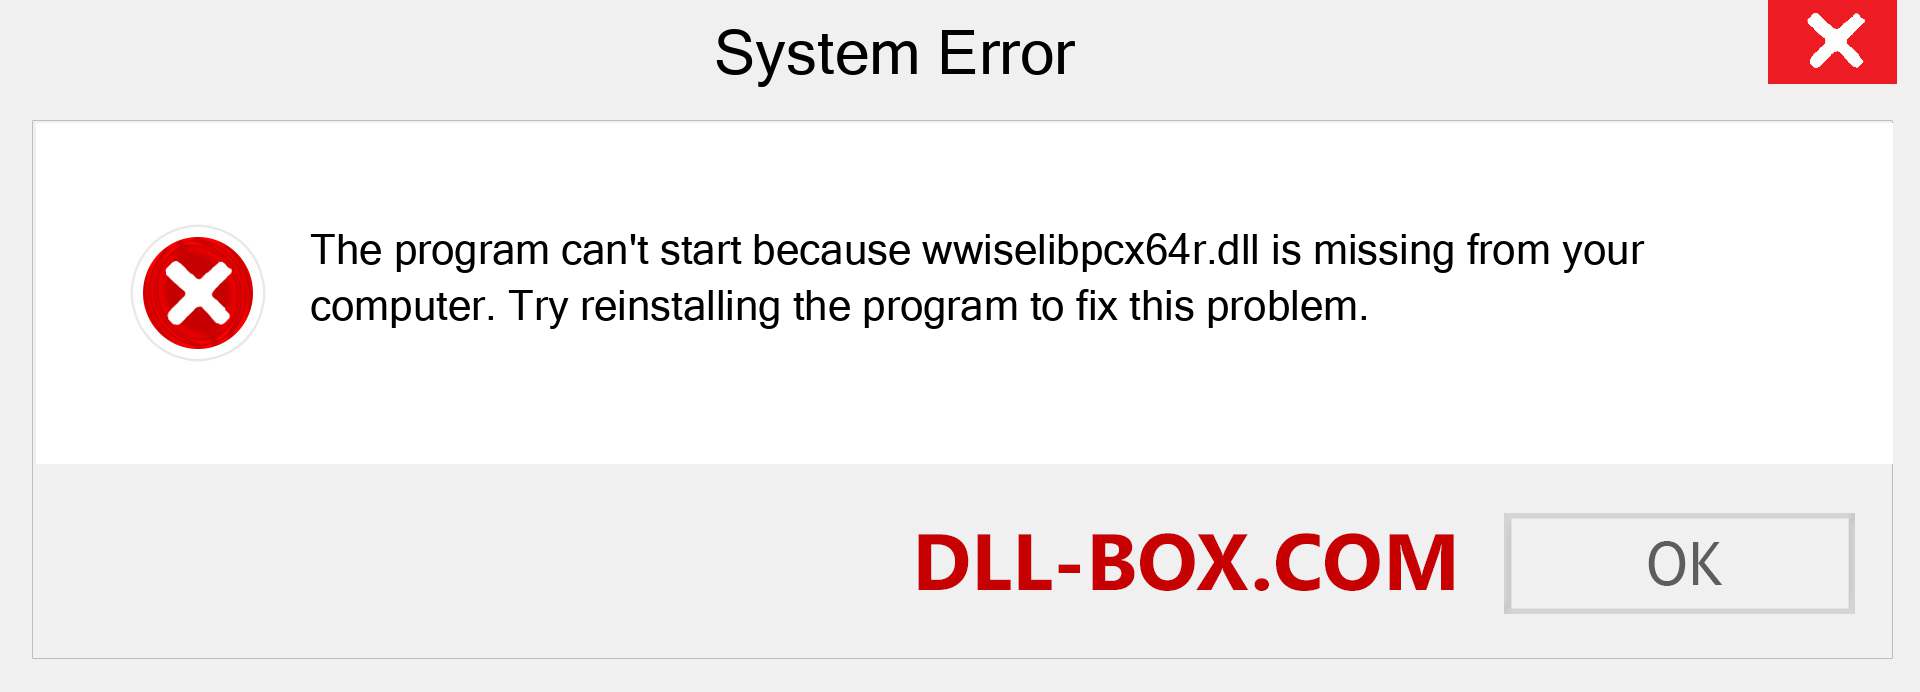  wwiselibpcx64r.dll file is missing?. Download for Windows 7, 8, 10 - Fix  wwiselibpcx64r dll Missing Error on Windows, photos, images